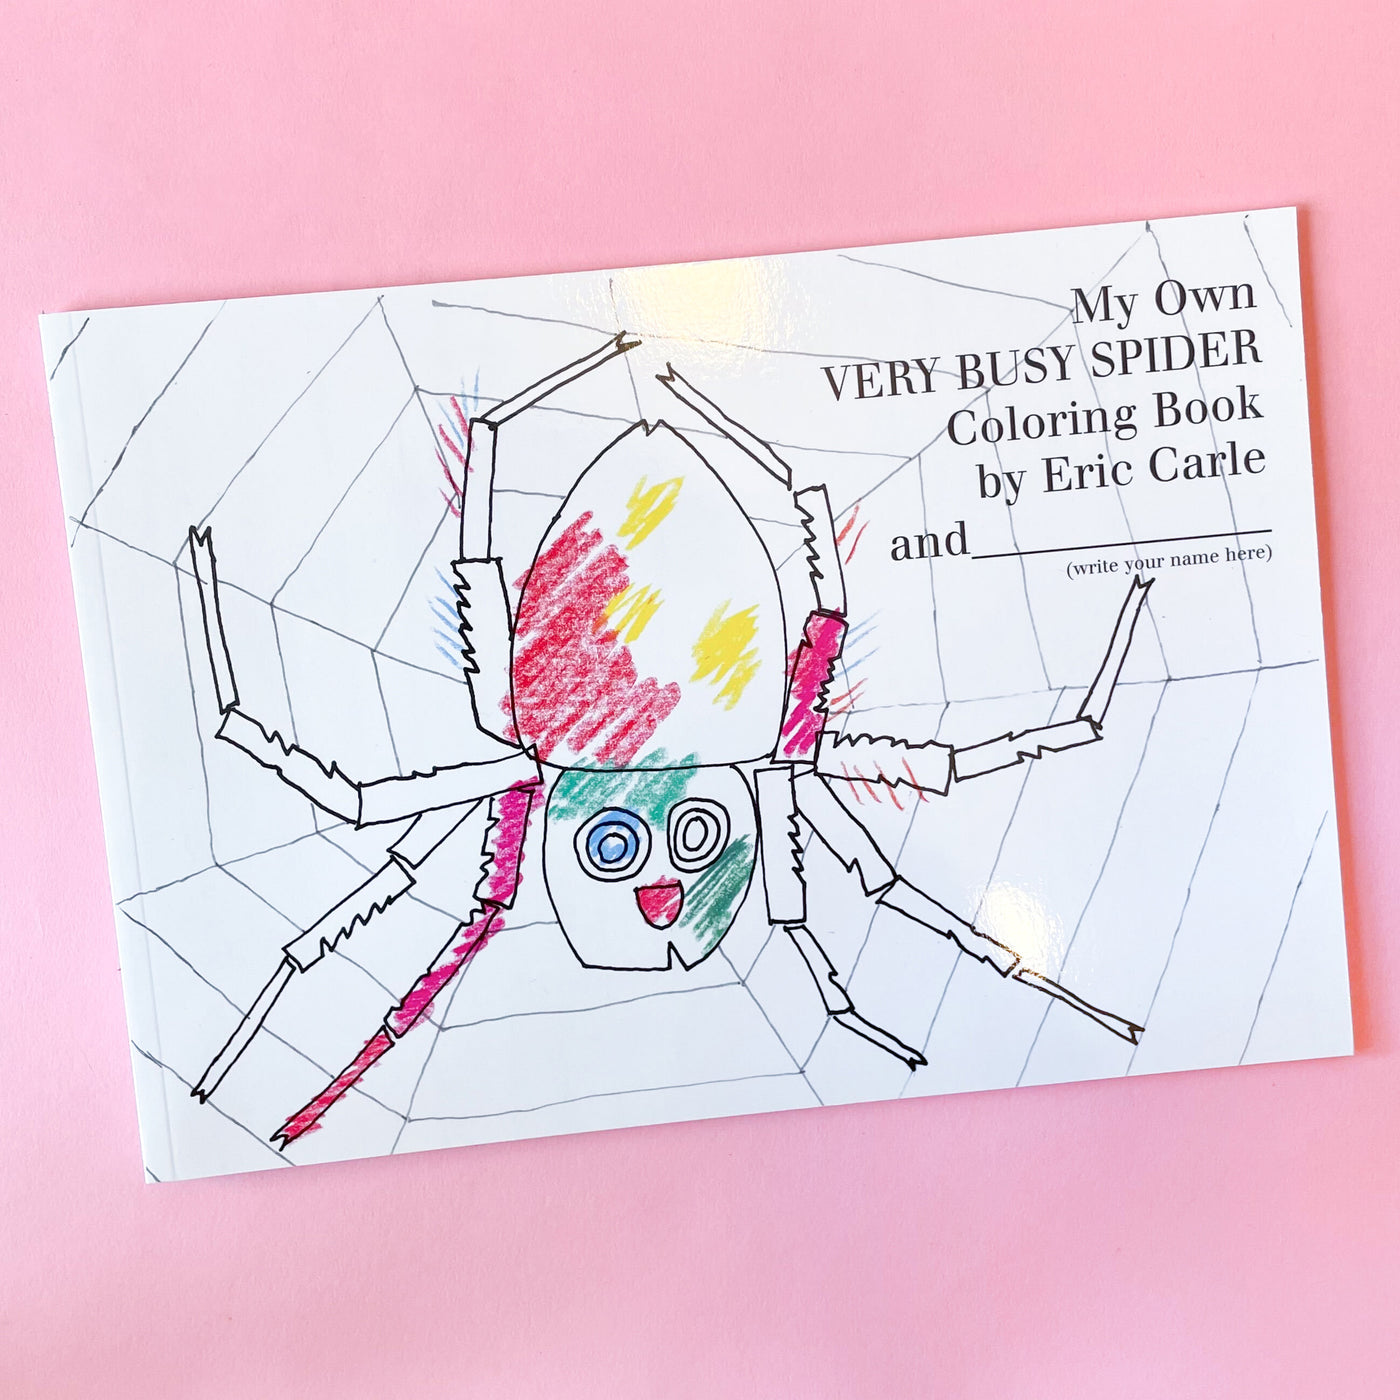 My Own Very Busy Spider Coloring Book Coloring Book By Eric Carle